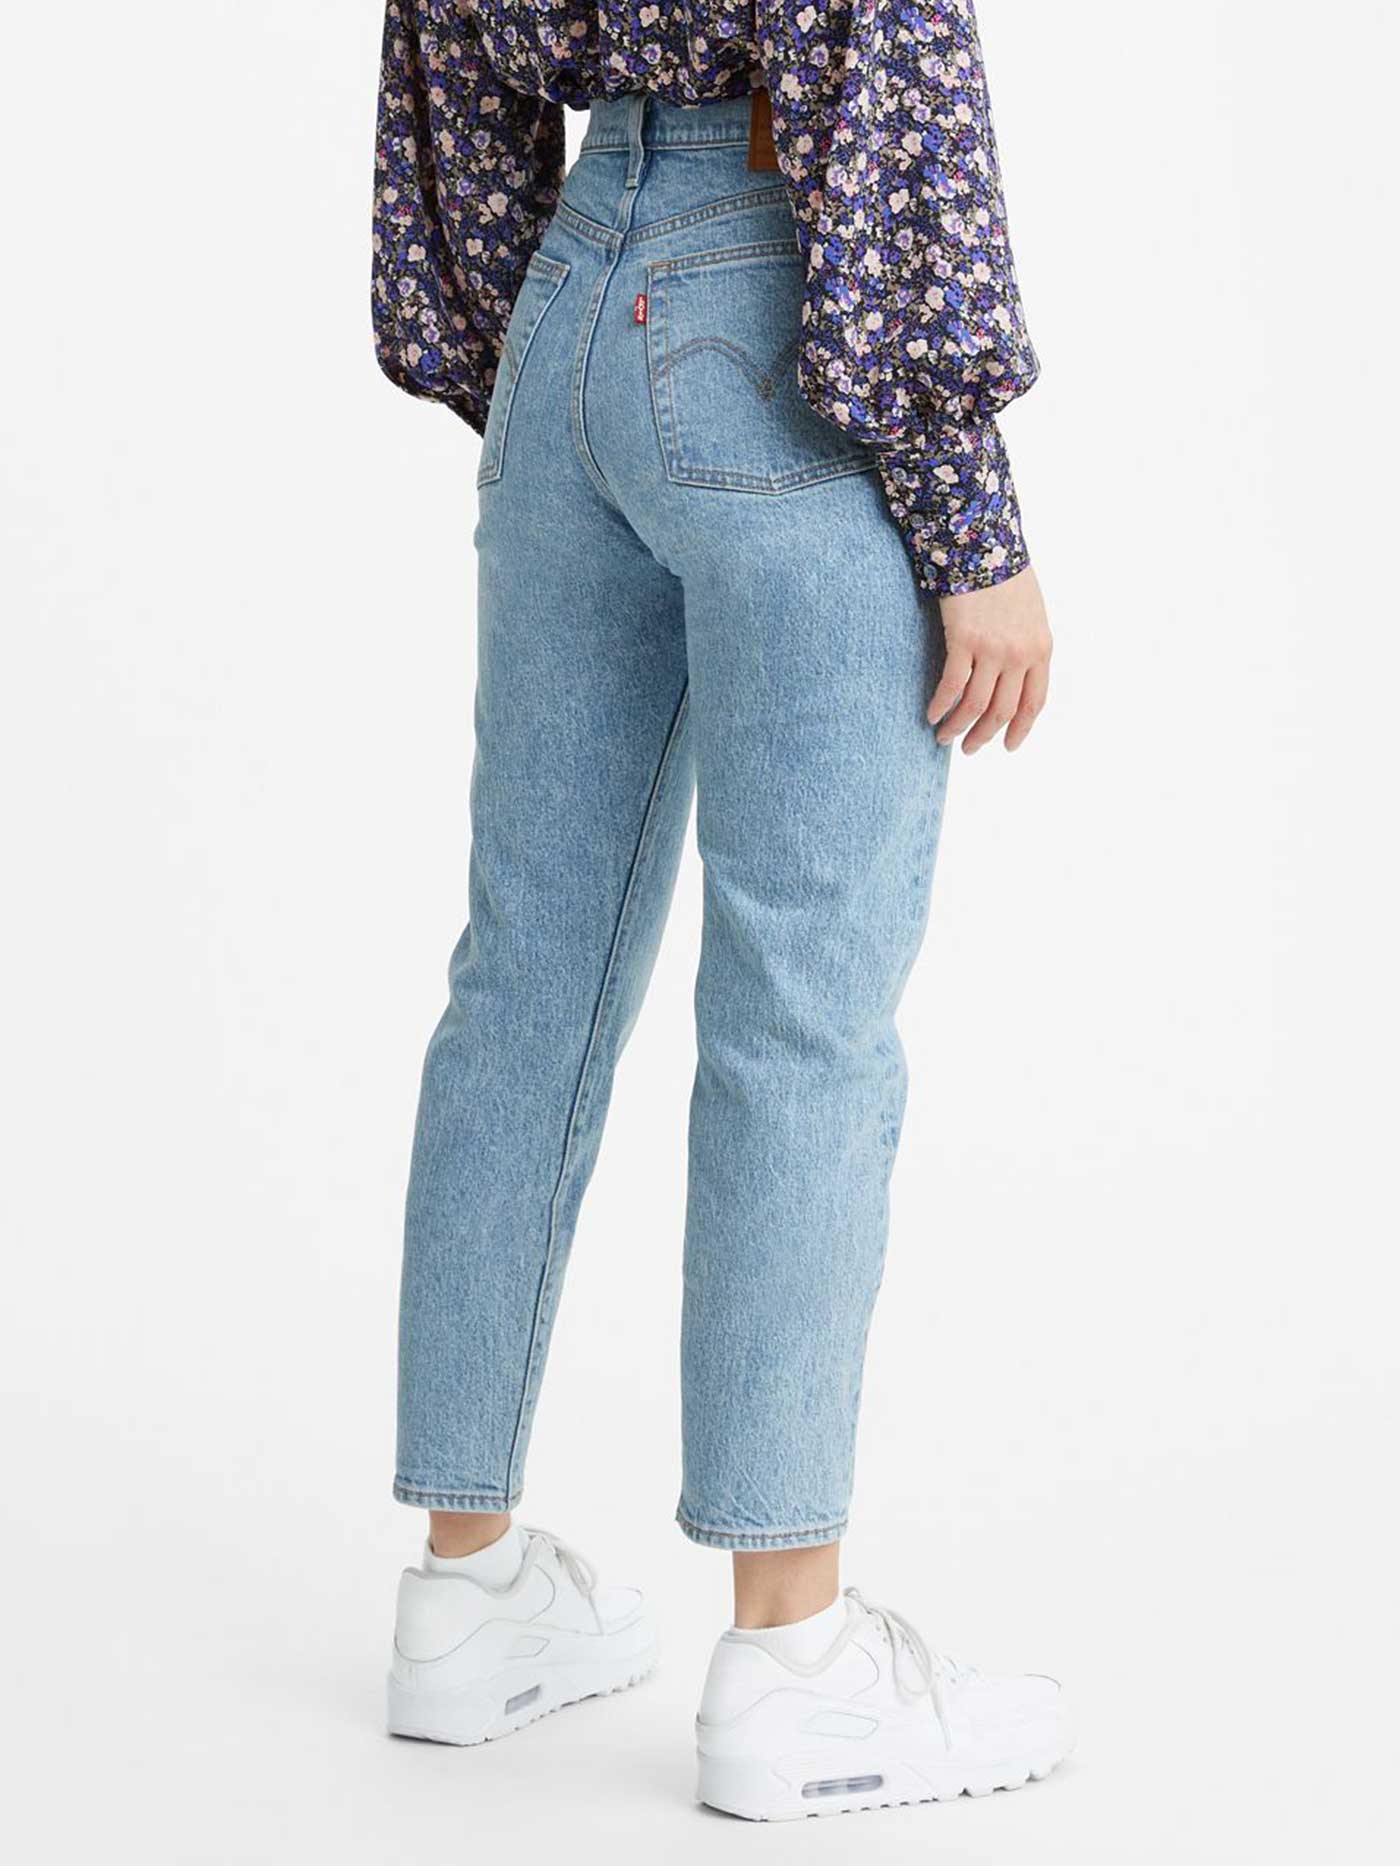 Levis Wedgie Ankle Fit Jeans